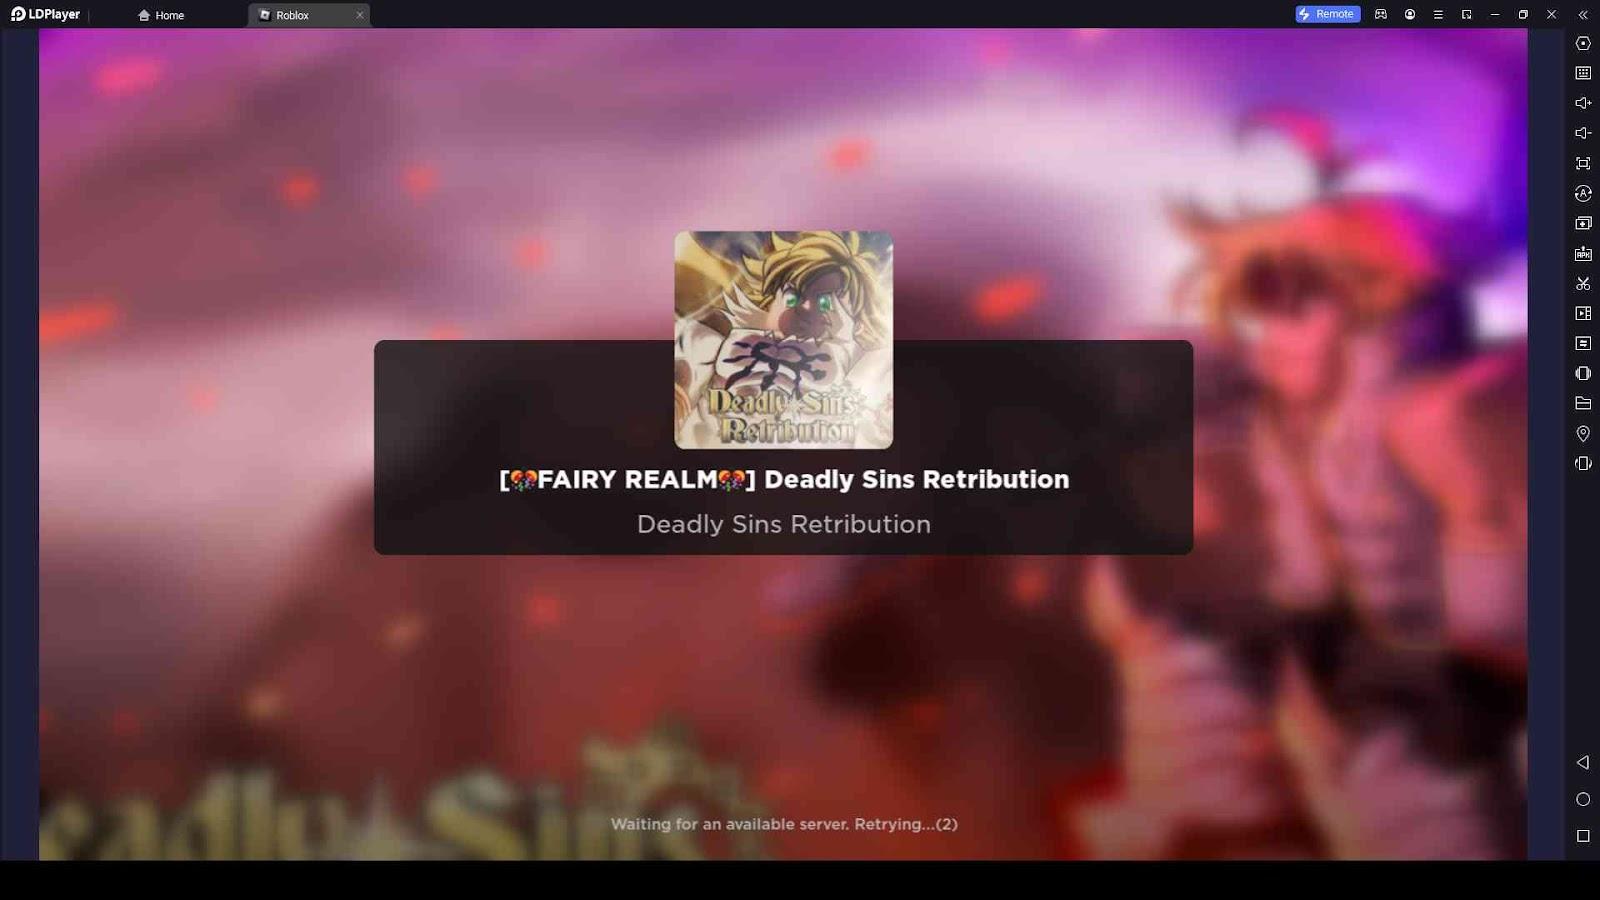 FREE CODES Deadly Sins Retribution FREE CODES gives FREE